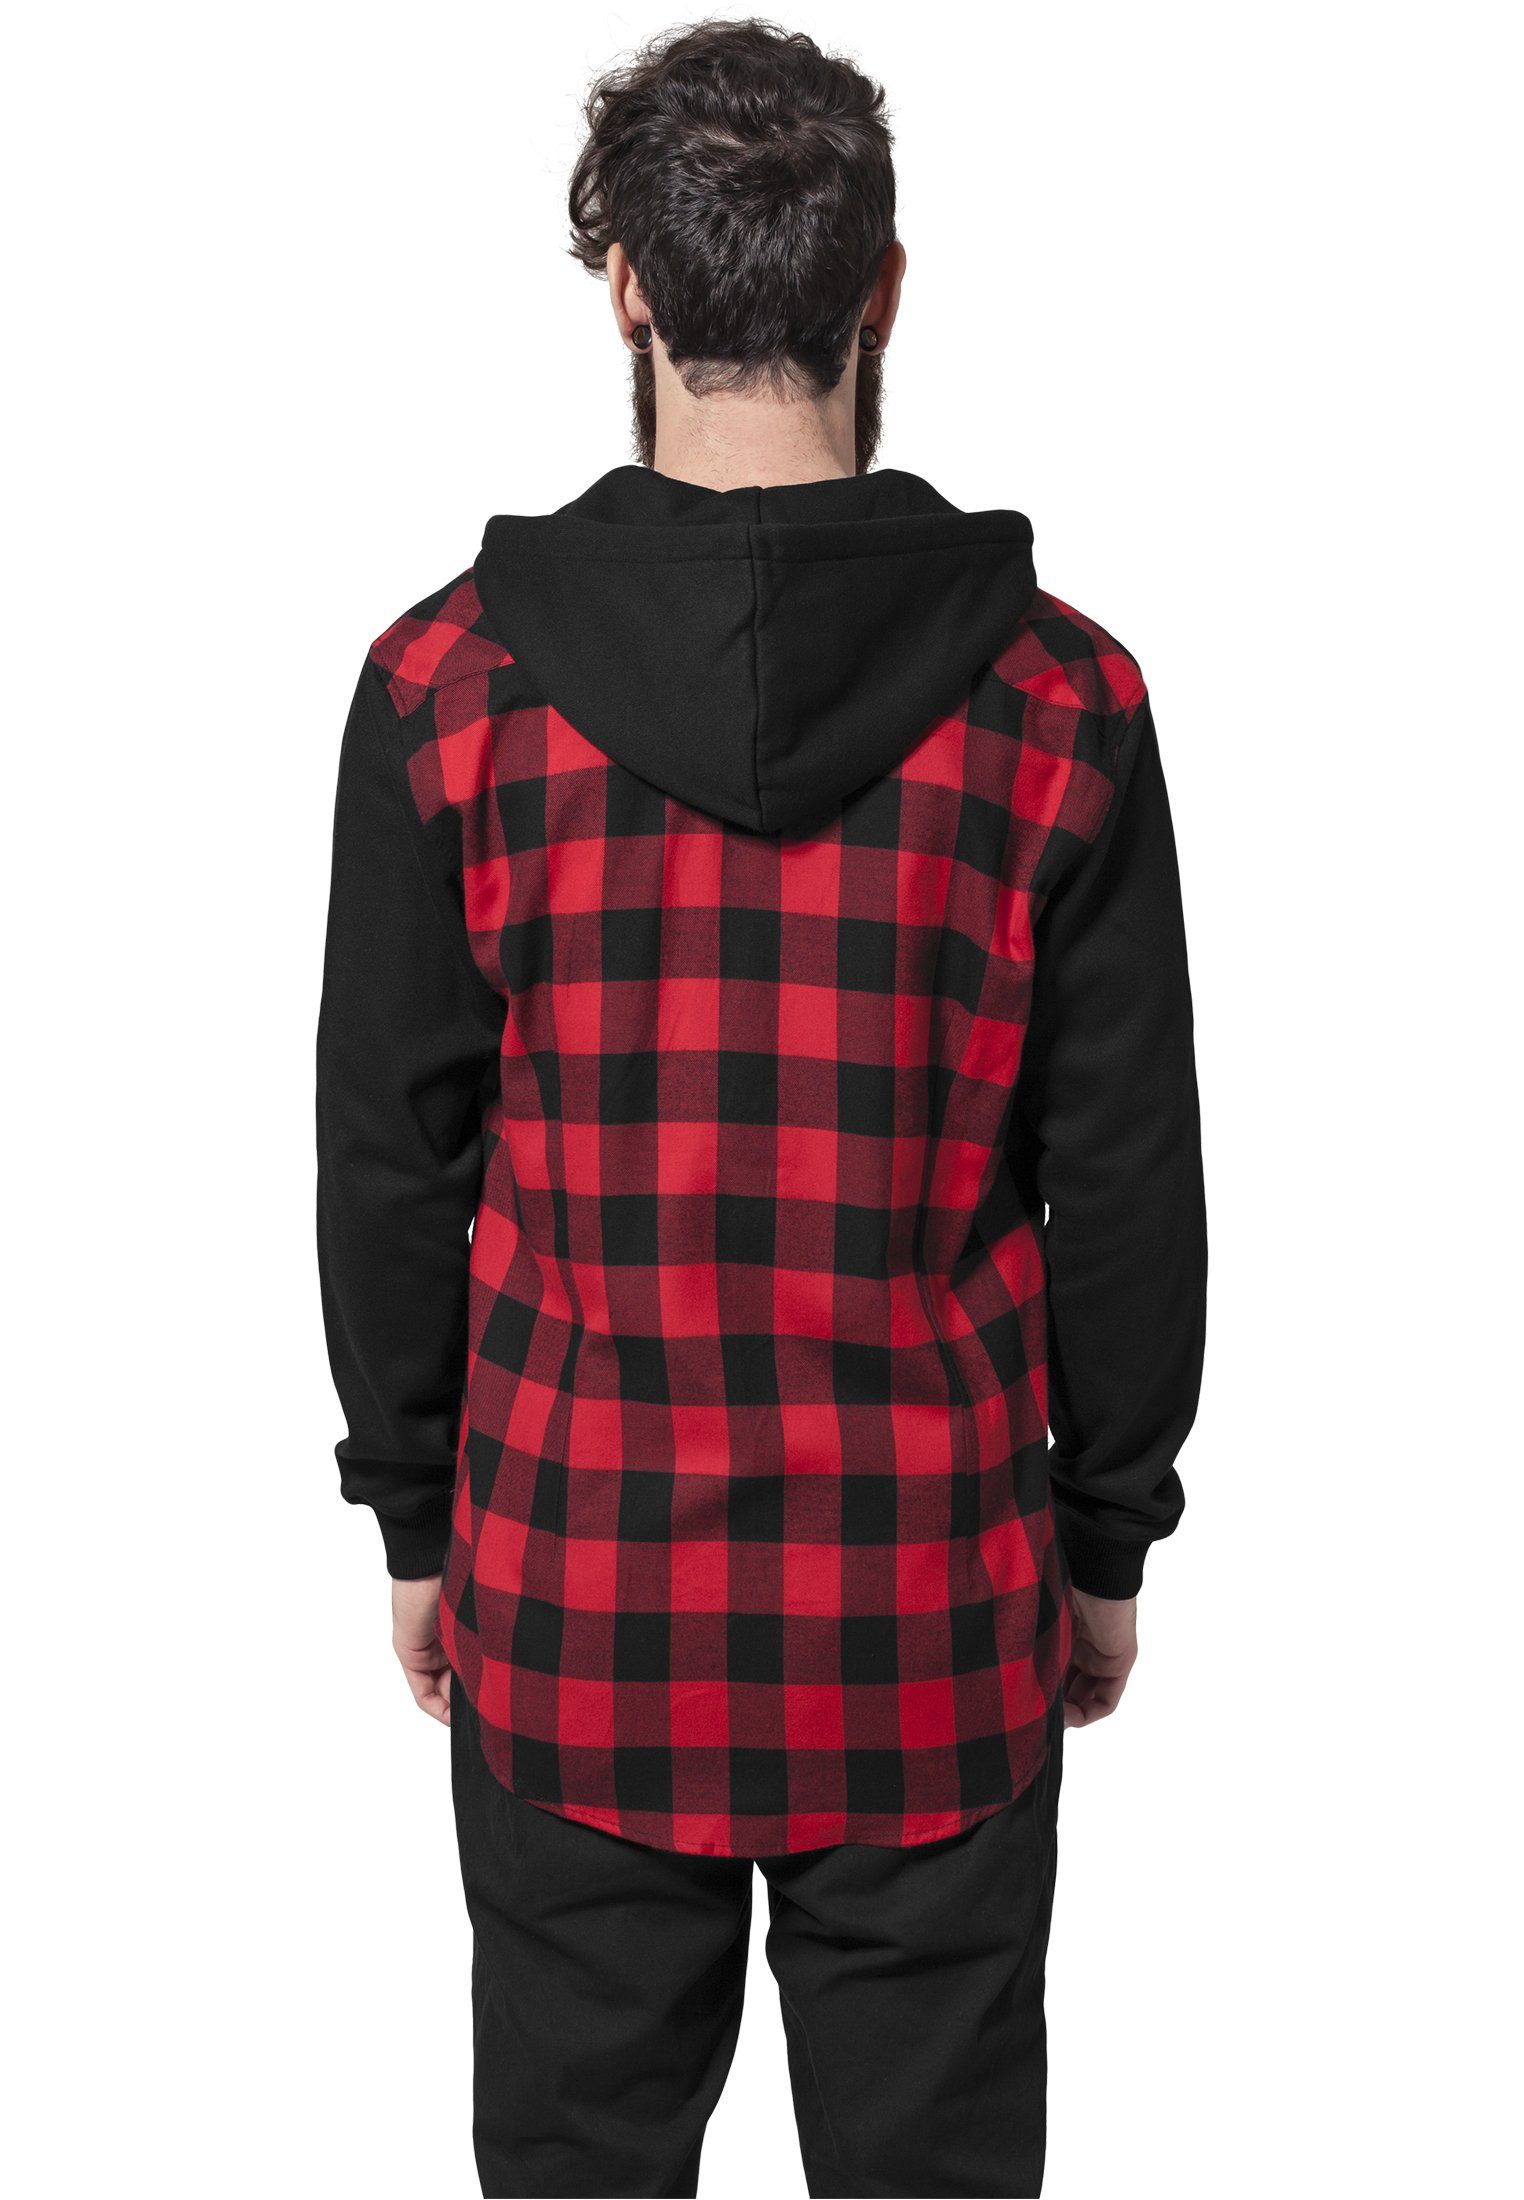 Herren CLASSICS URBAN Checked blk/red/bl Hooded Shirtjacke Sweat (1-tlg) Shirt Flanell Sleeve